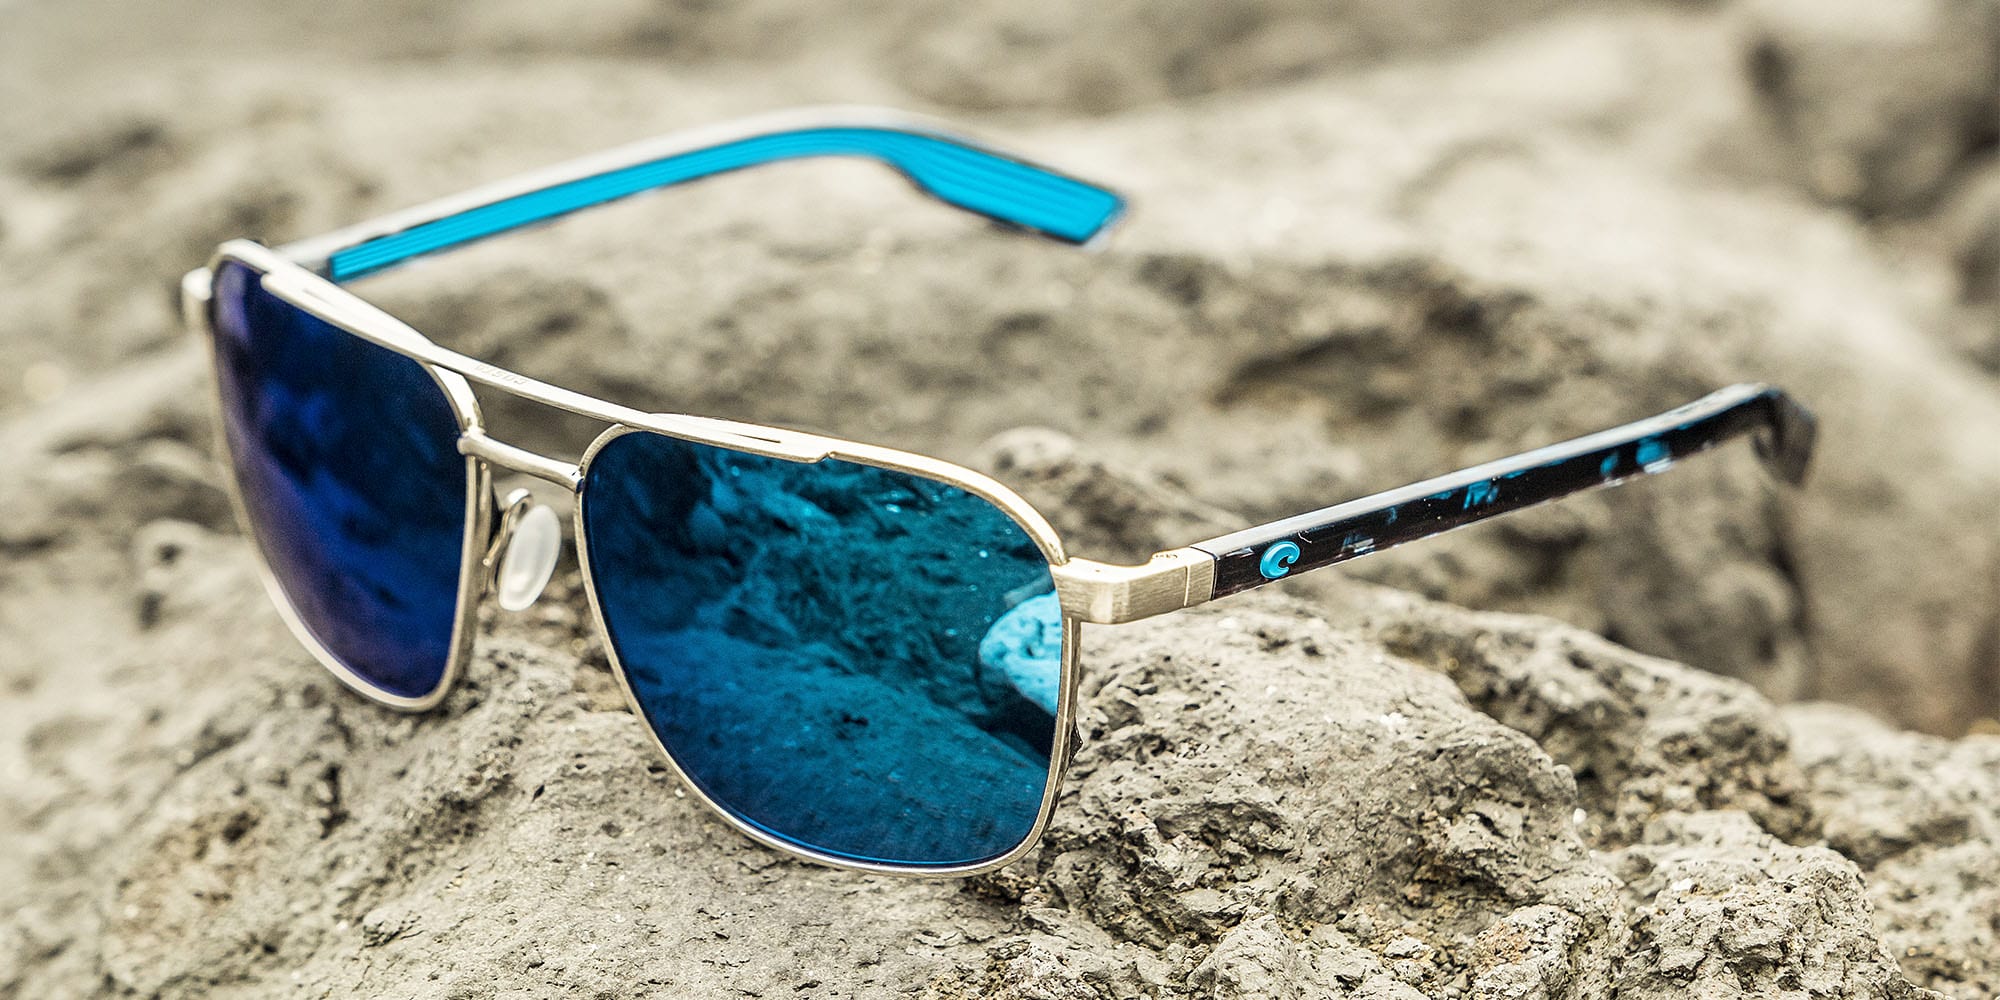 Wader Polarized Sunglasses in Blue Mirror